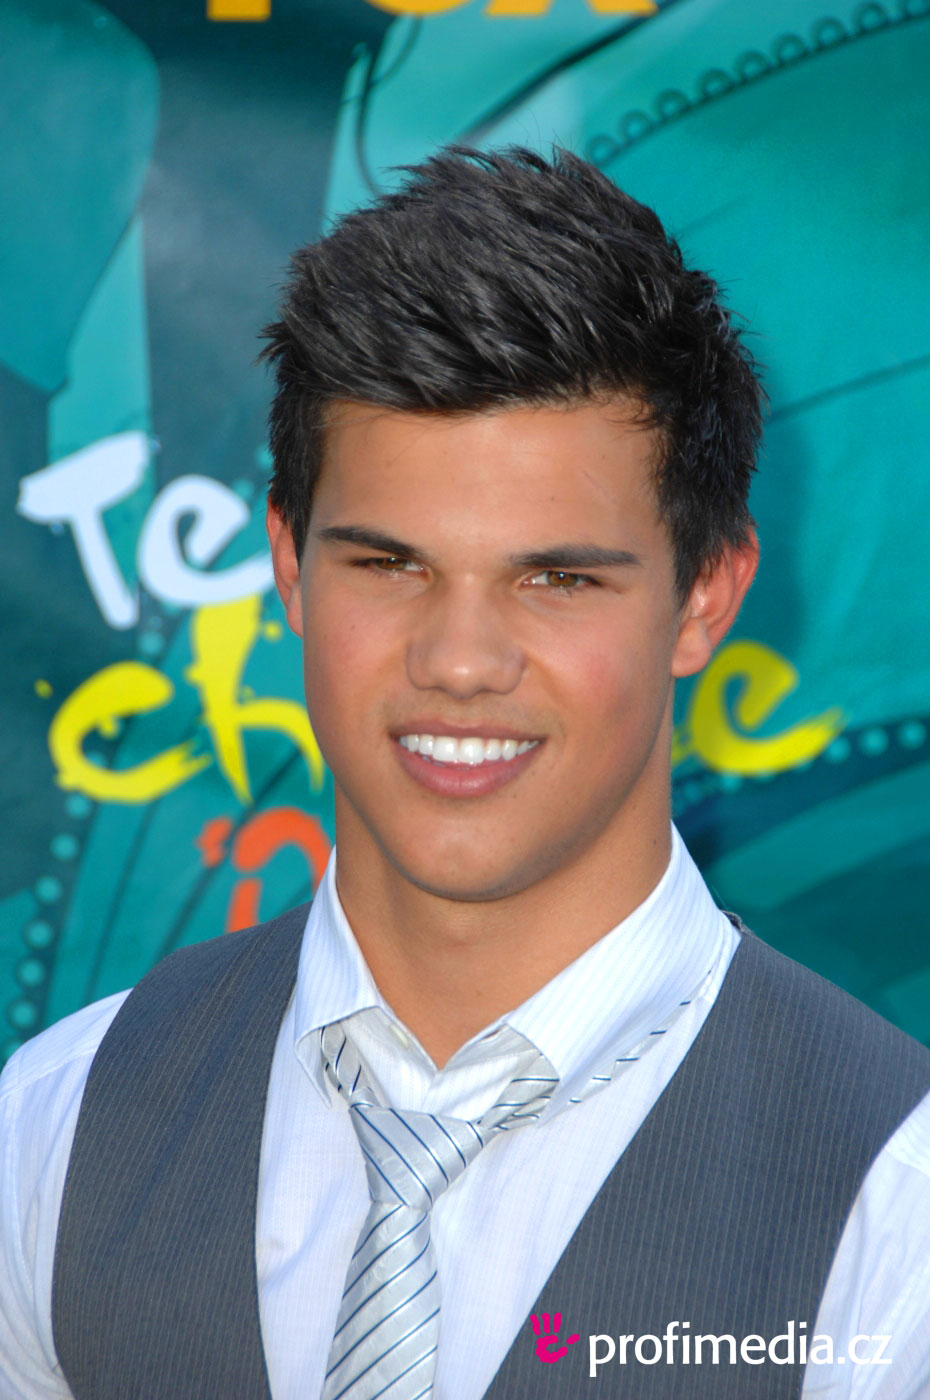 Prom hairstyle - TAYLOR LAUTNER - TAYLOR LAUTNER